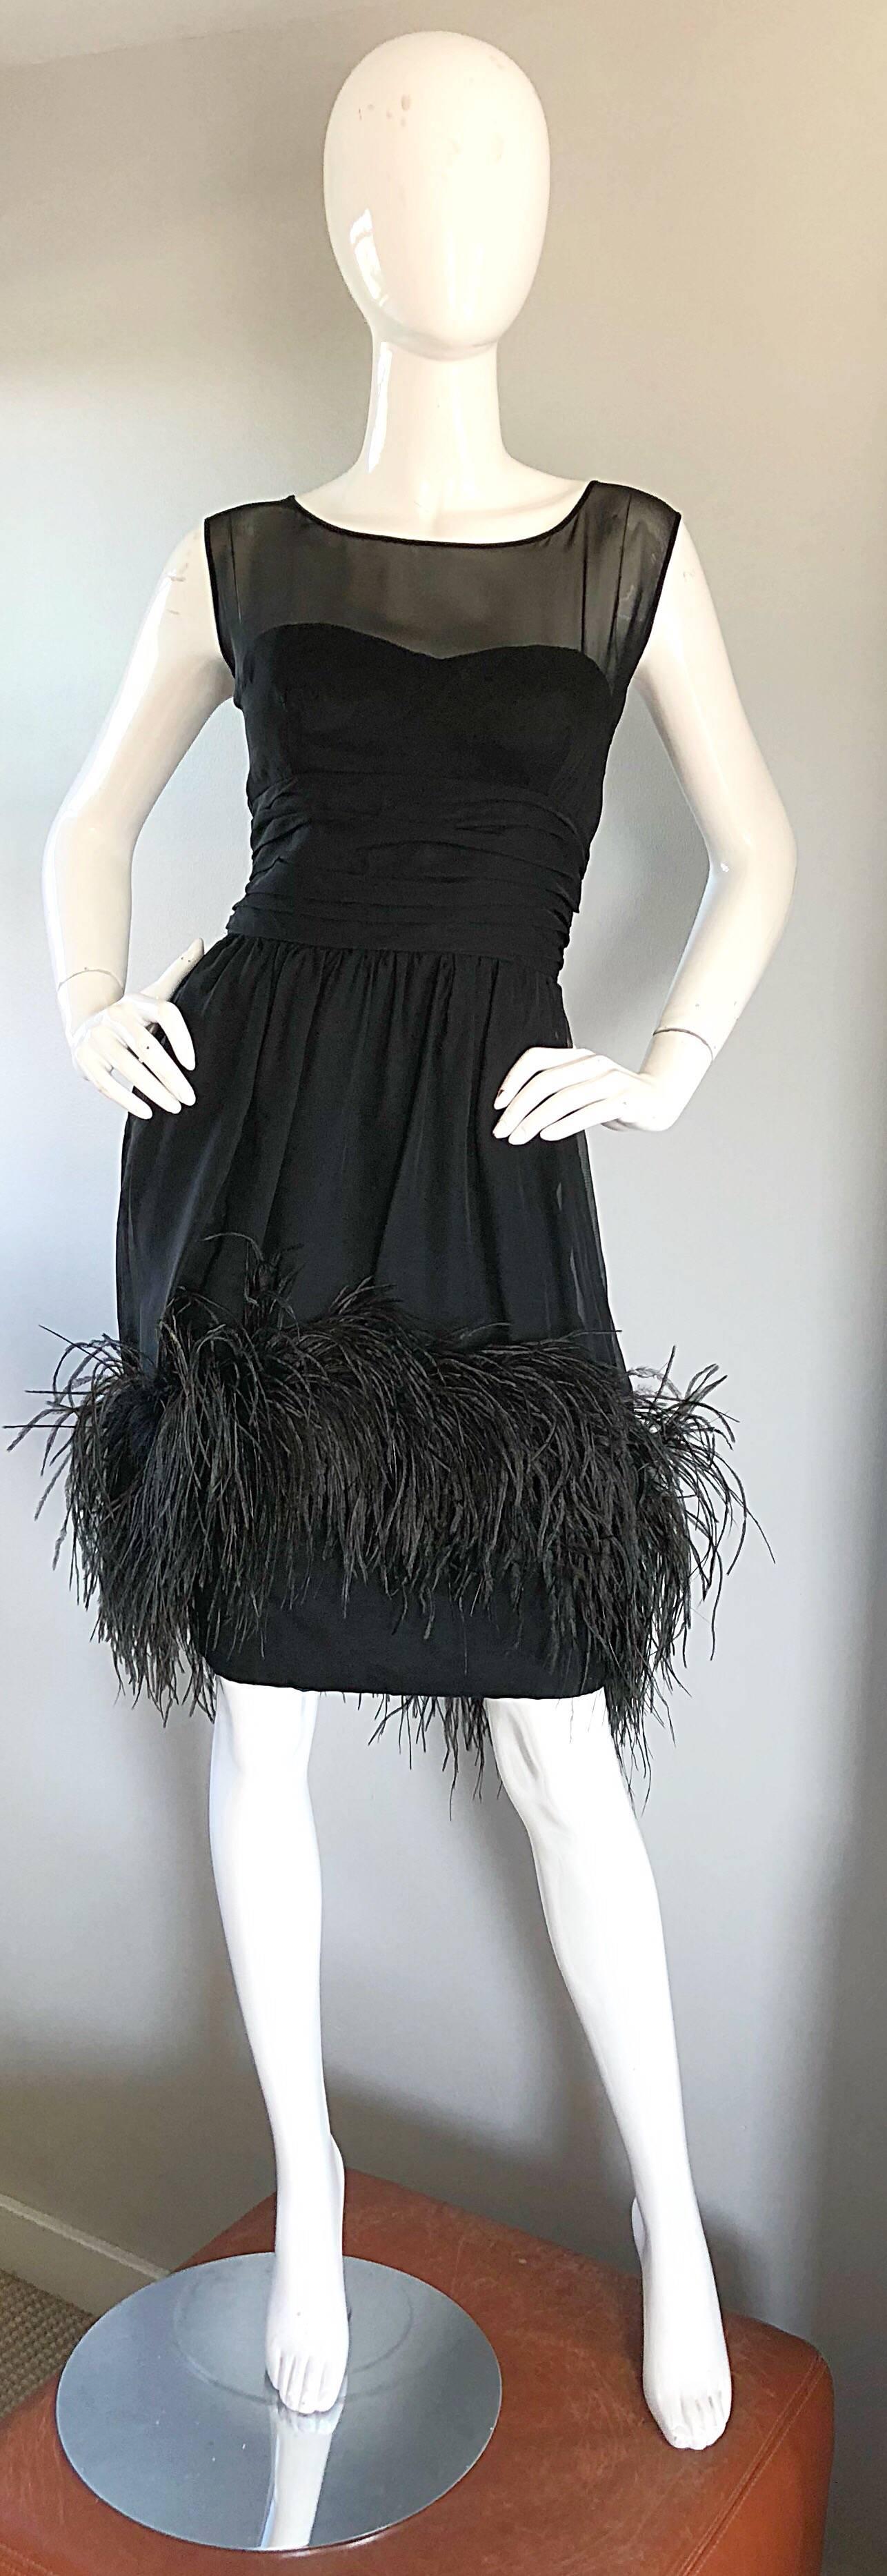 Gorgeous and rare 1950s FERMAN O'GRADY black silk chiffon and crepe nude illusion demi couture cocktail dress! Features a fitted taffeta strapless boned bodice with a semi sheer black chiffon overlay. Crepe skirt features the same black silk chiffon